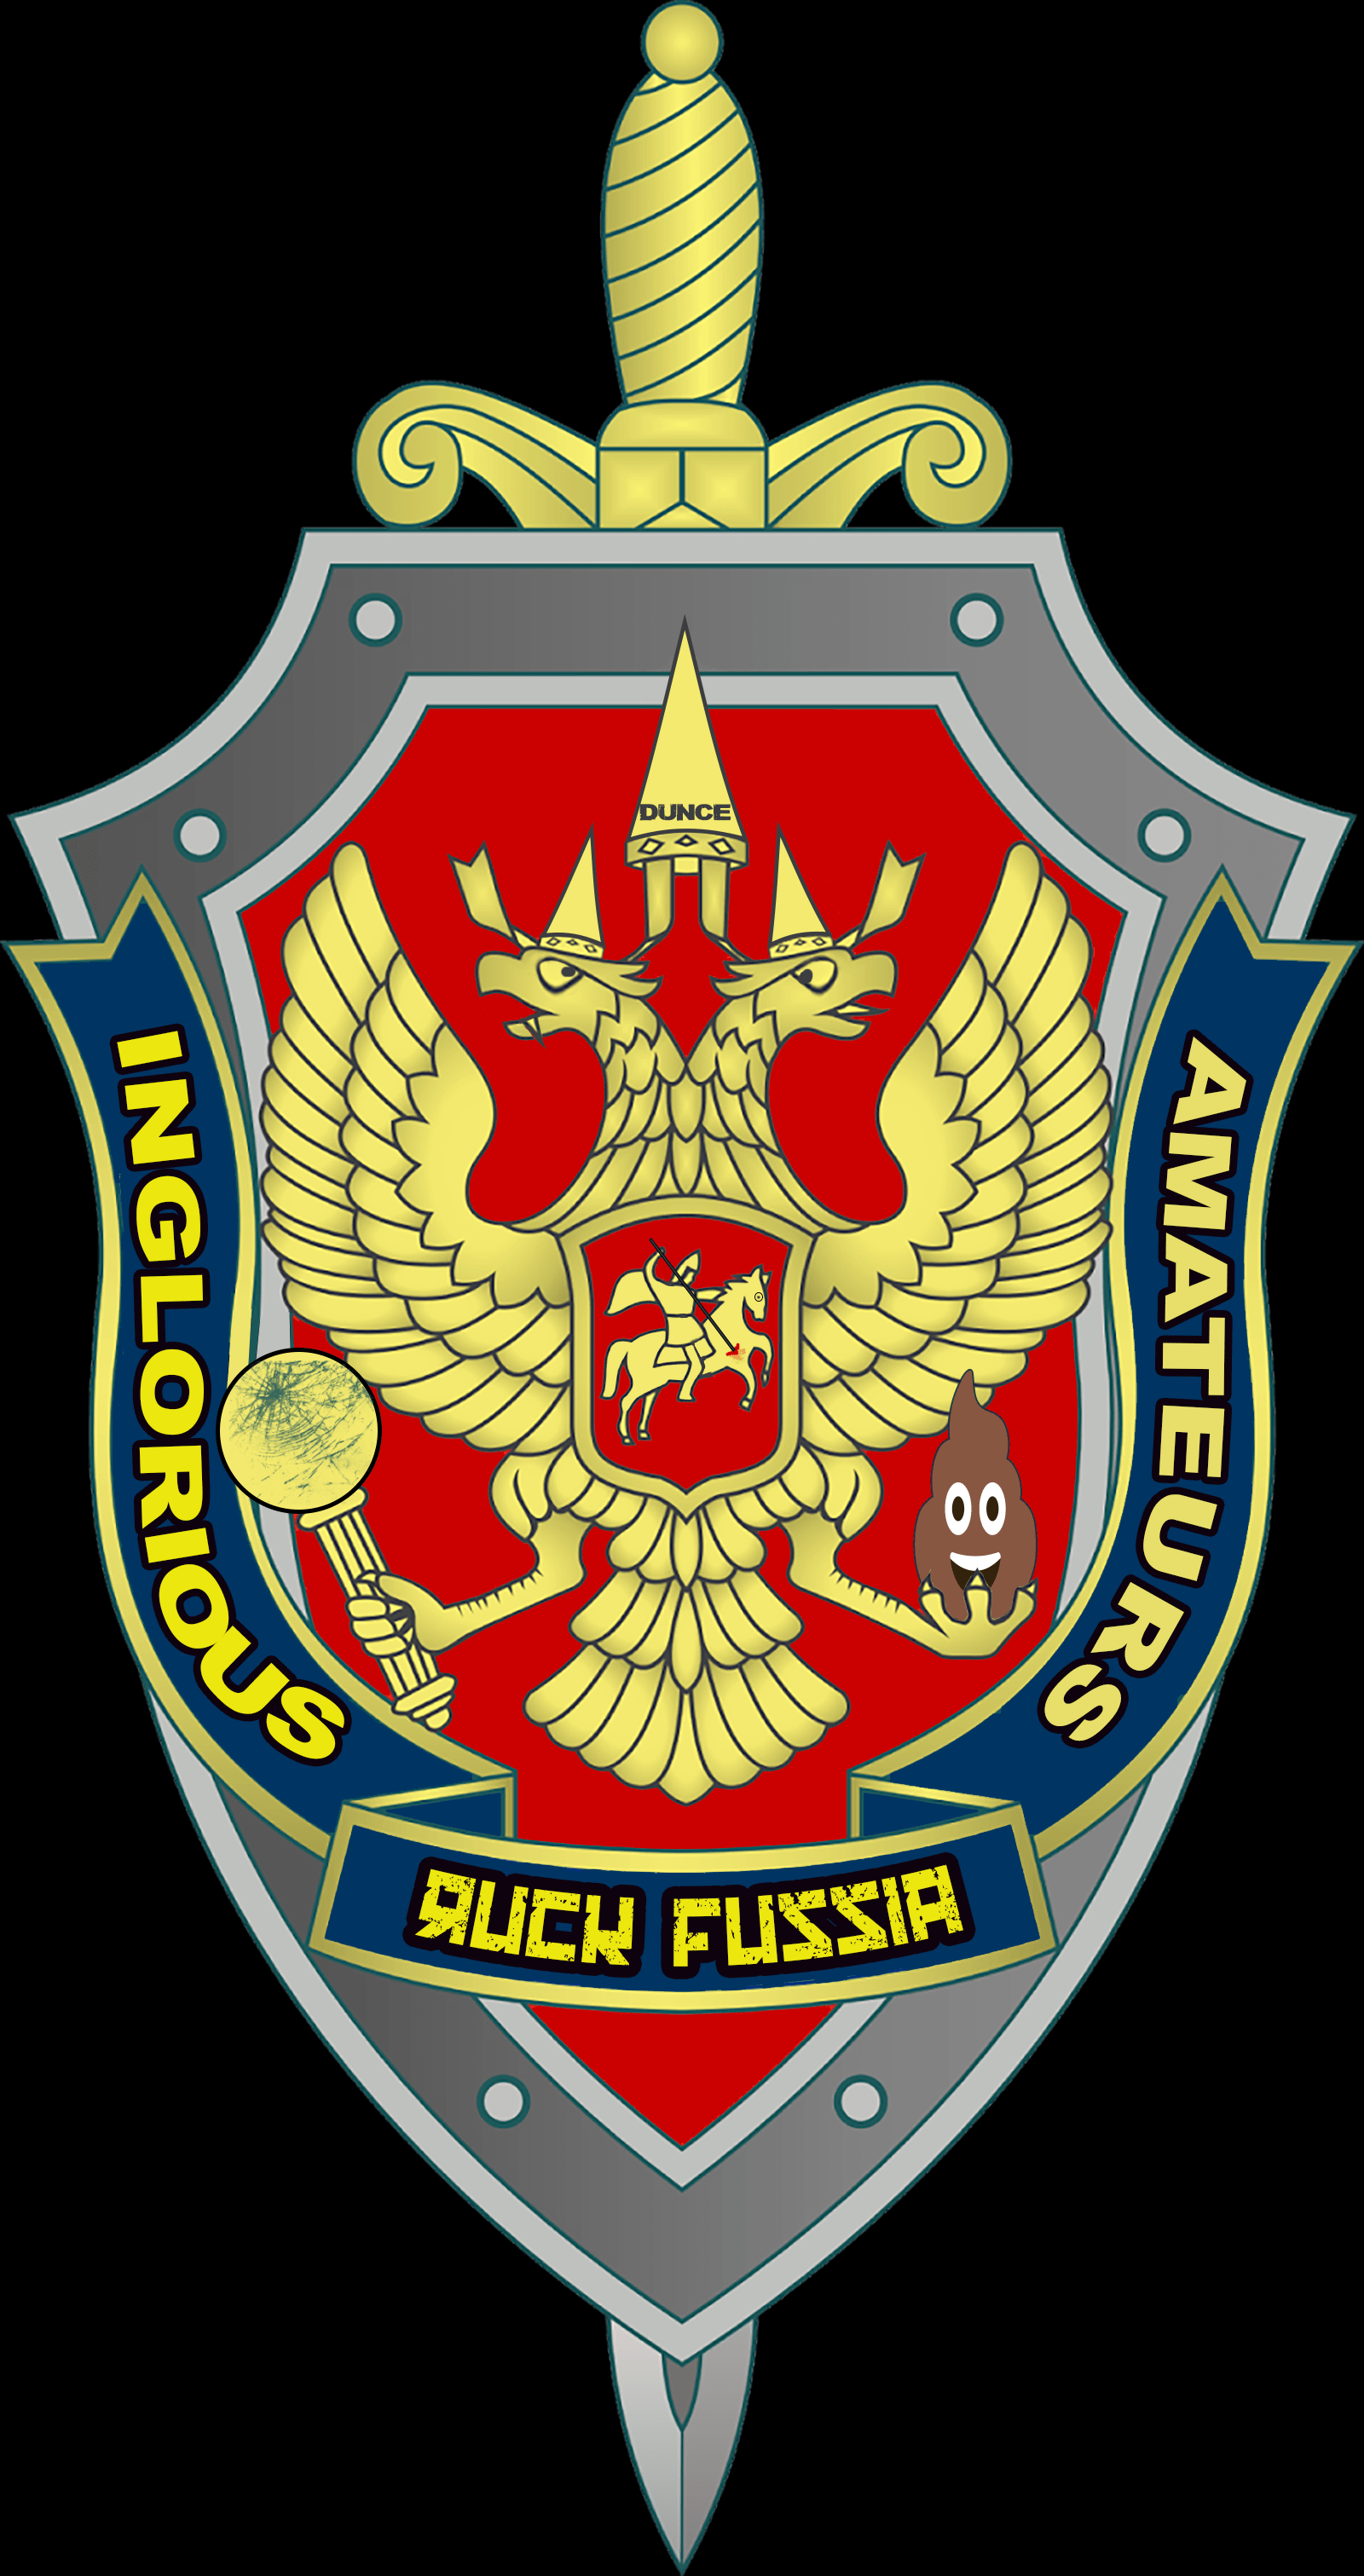 Ruck Fussia v3 - Inglorious Amateurs